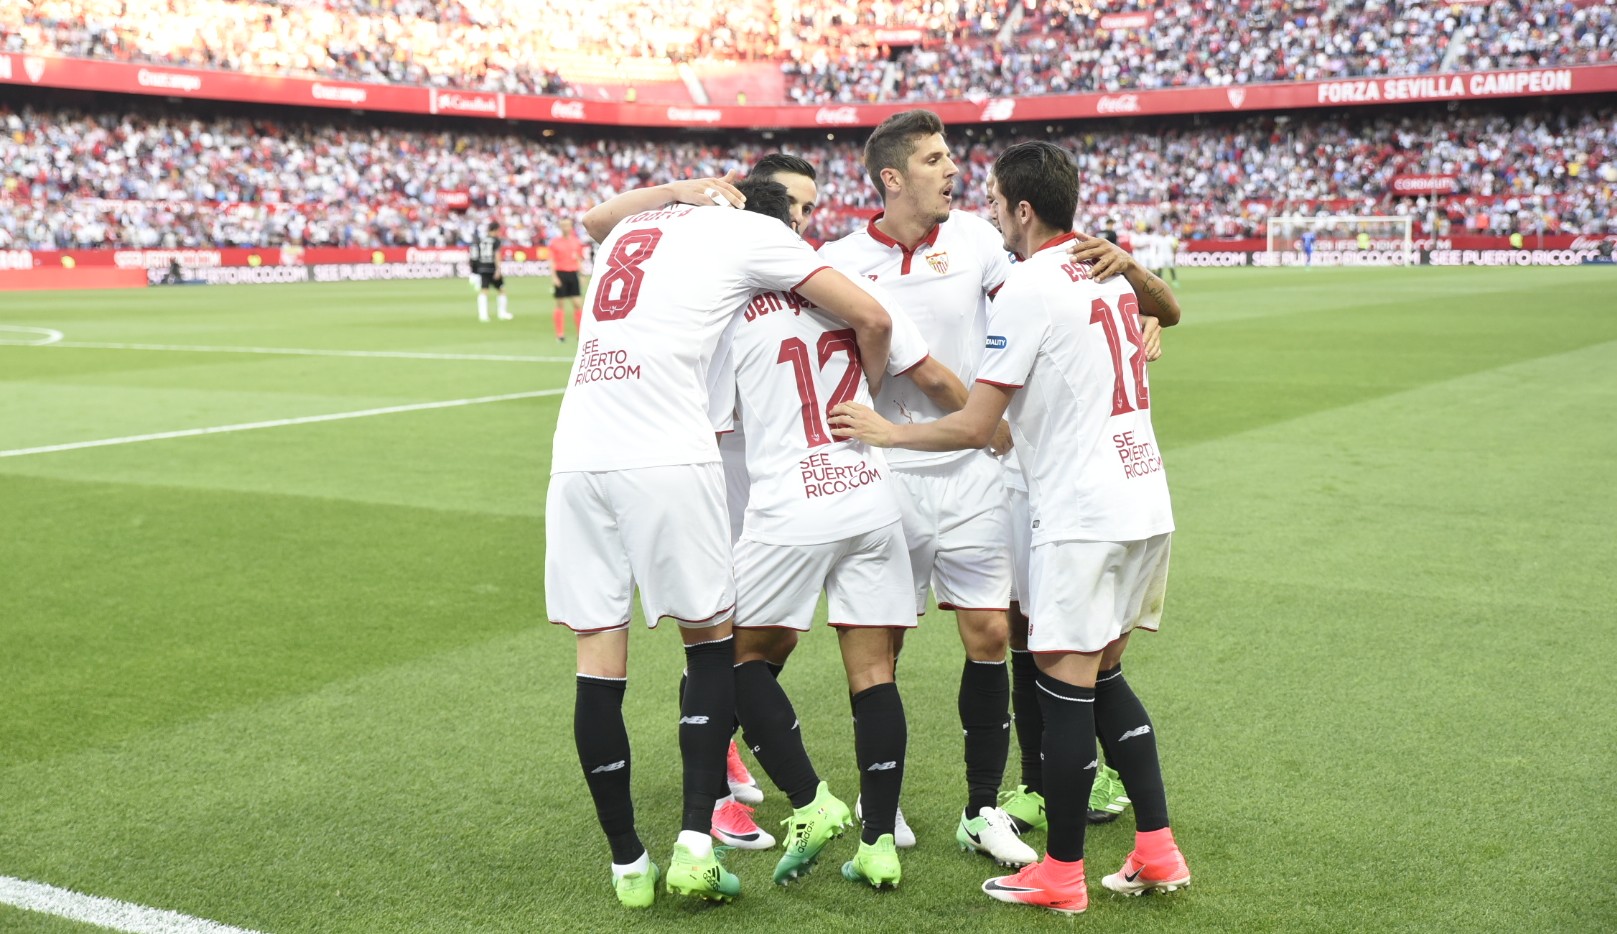 Celebration after the fourth goal against Deportivo